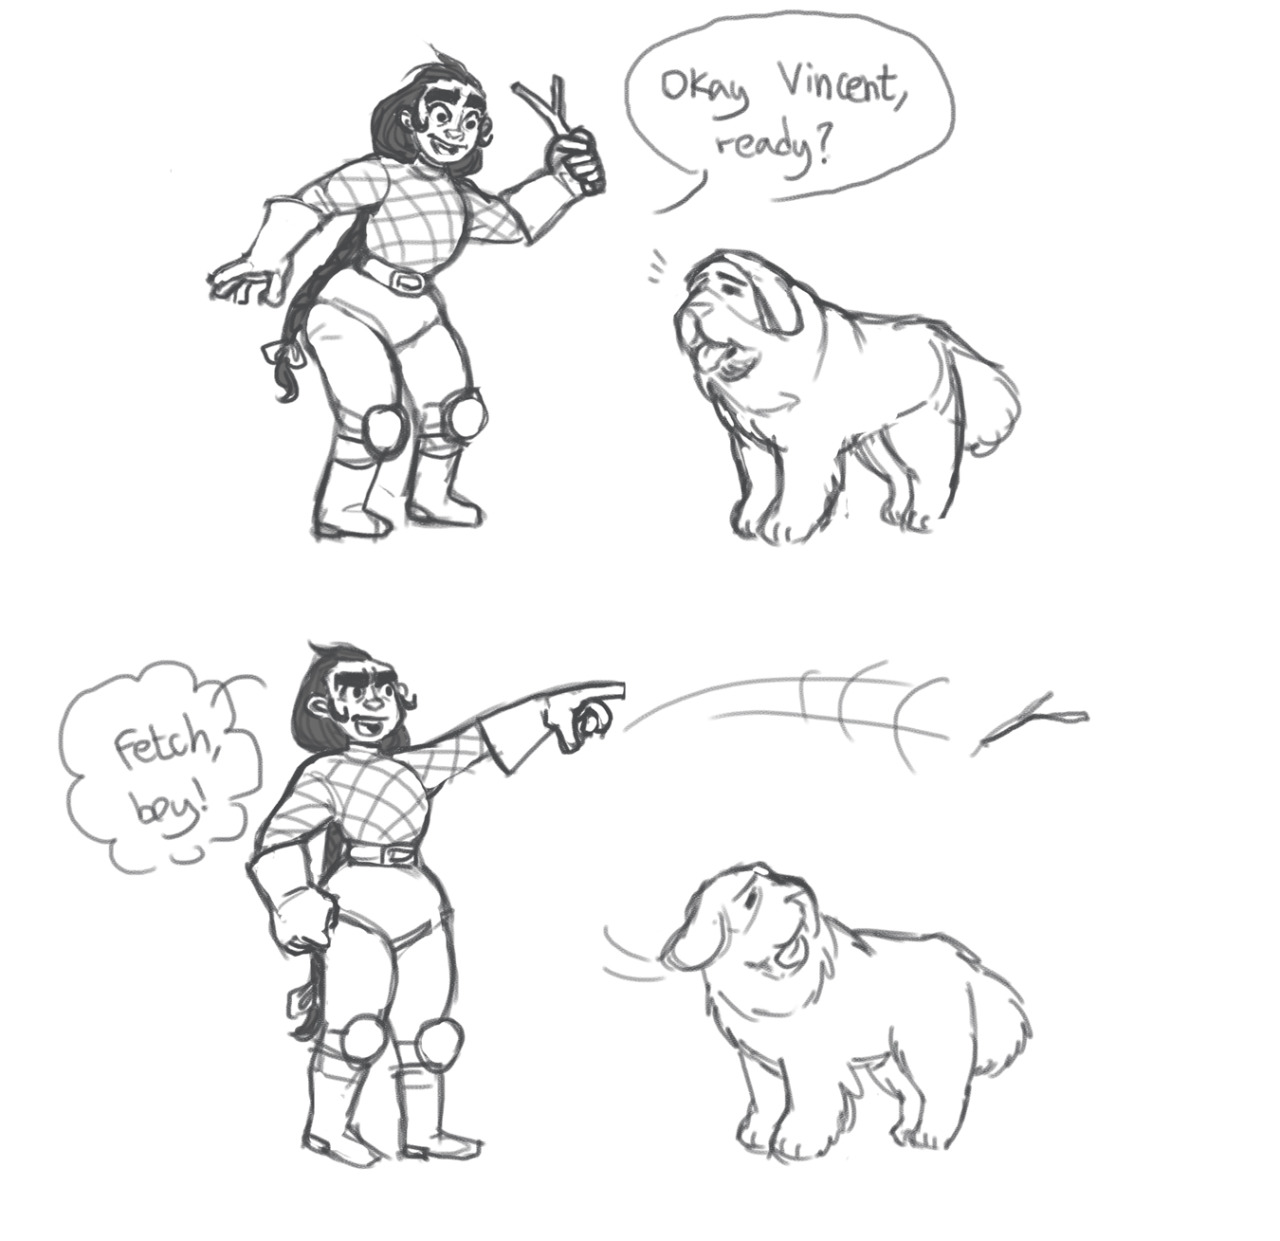 buttart: i can’t stop thinking about Ana’s pets (vincent belongs to her family)